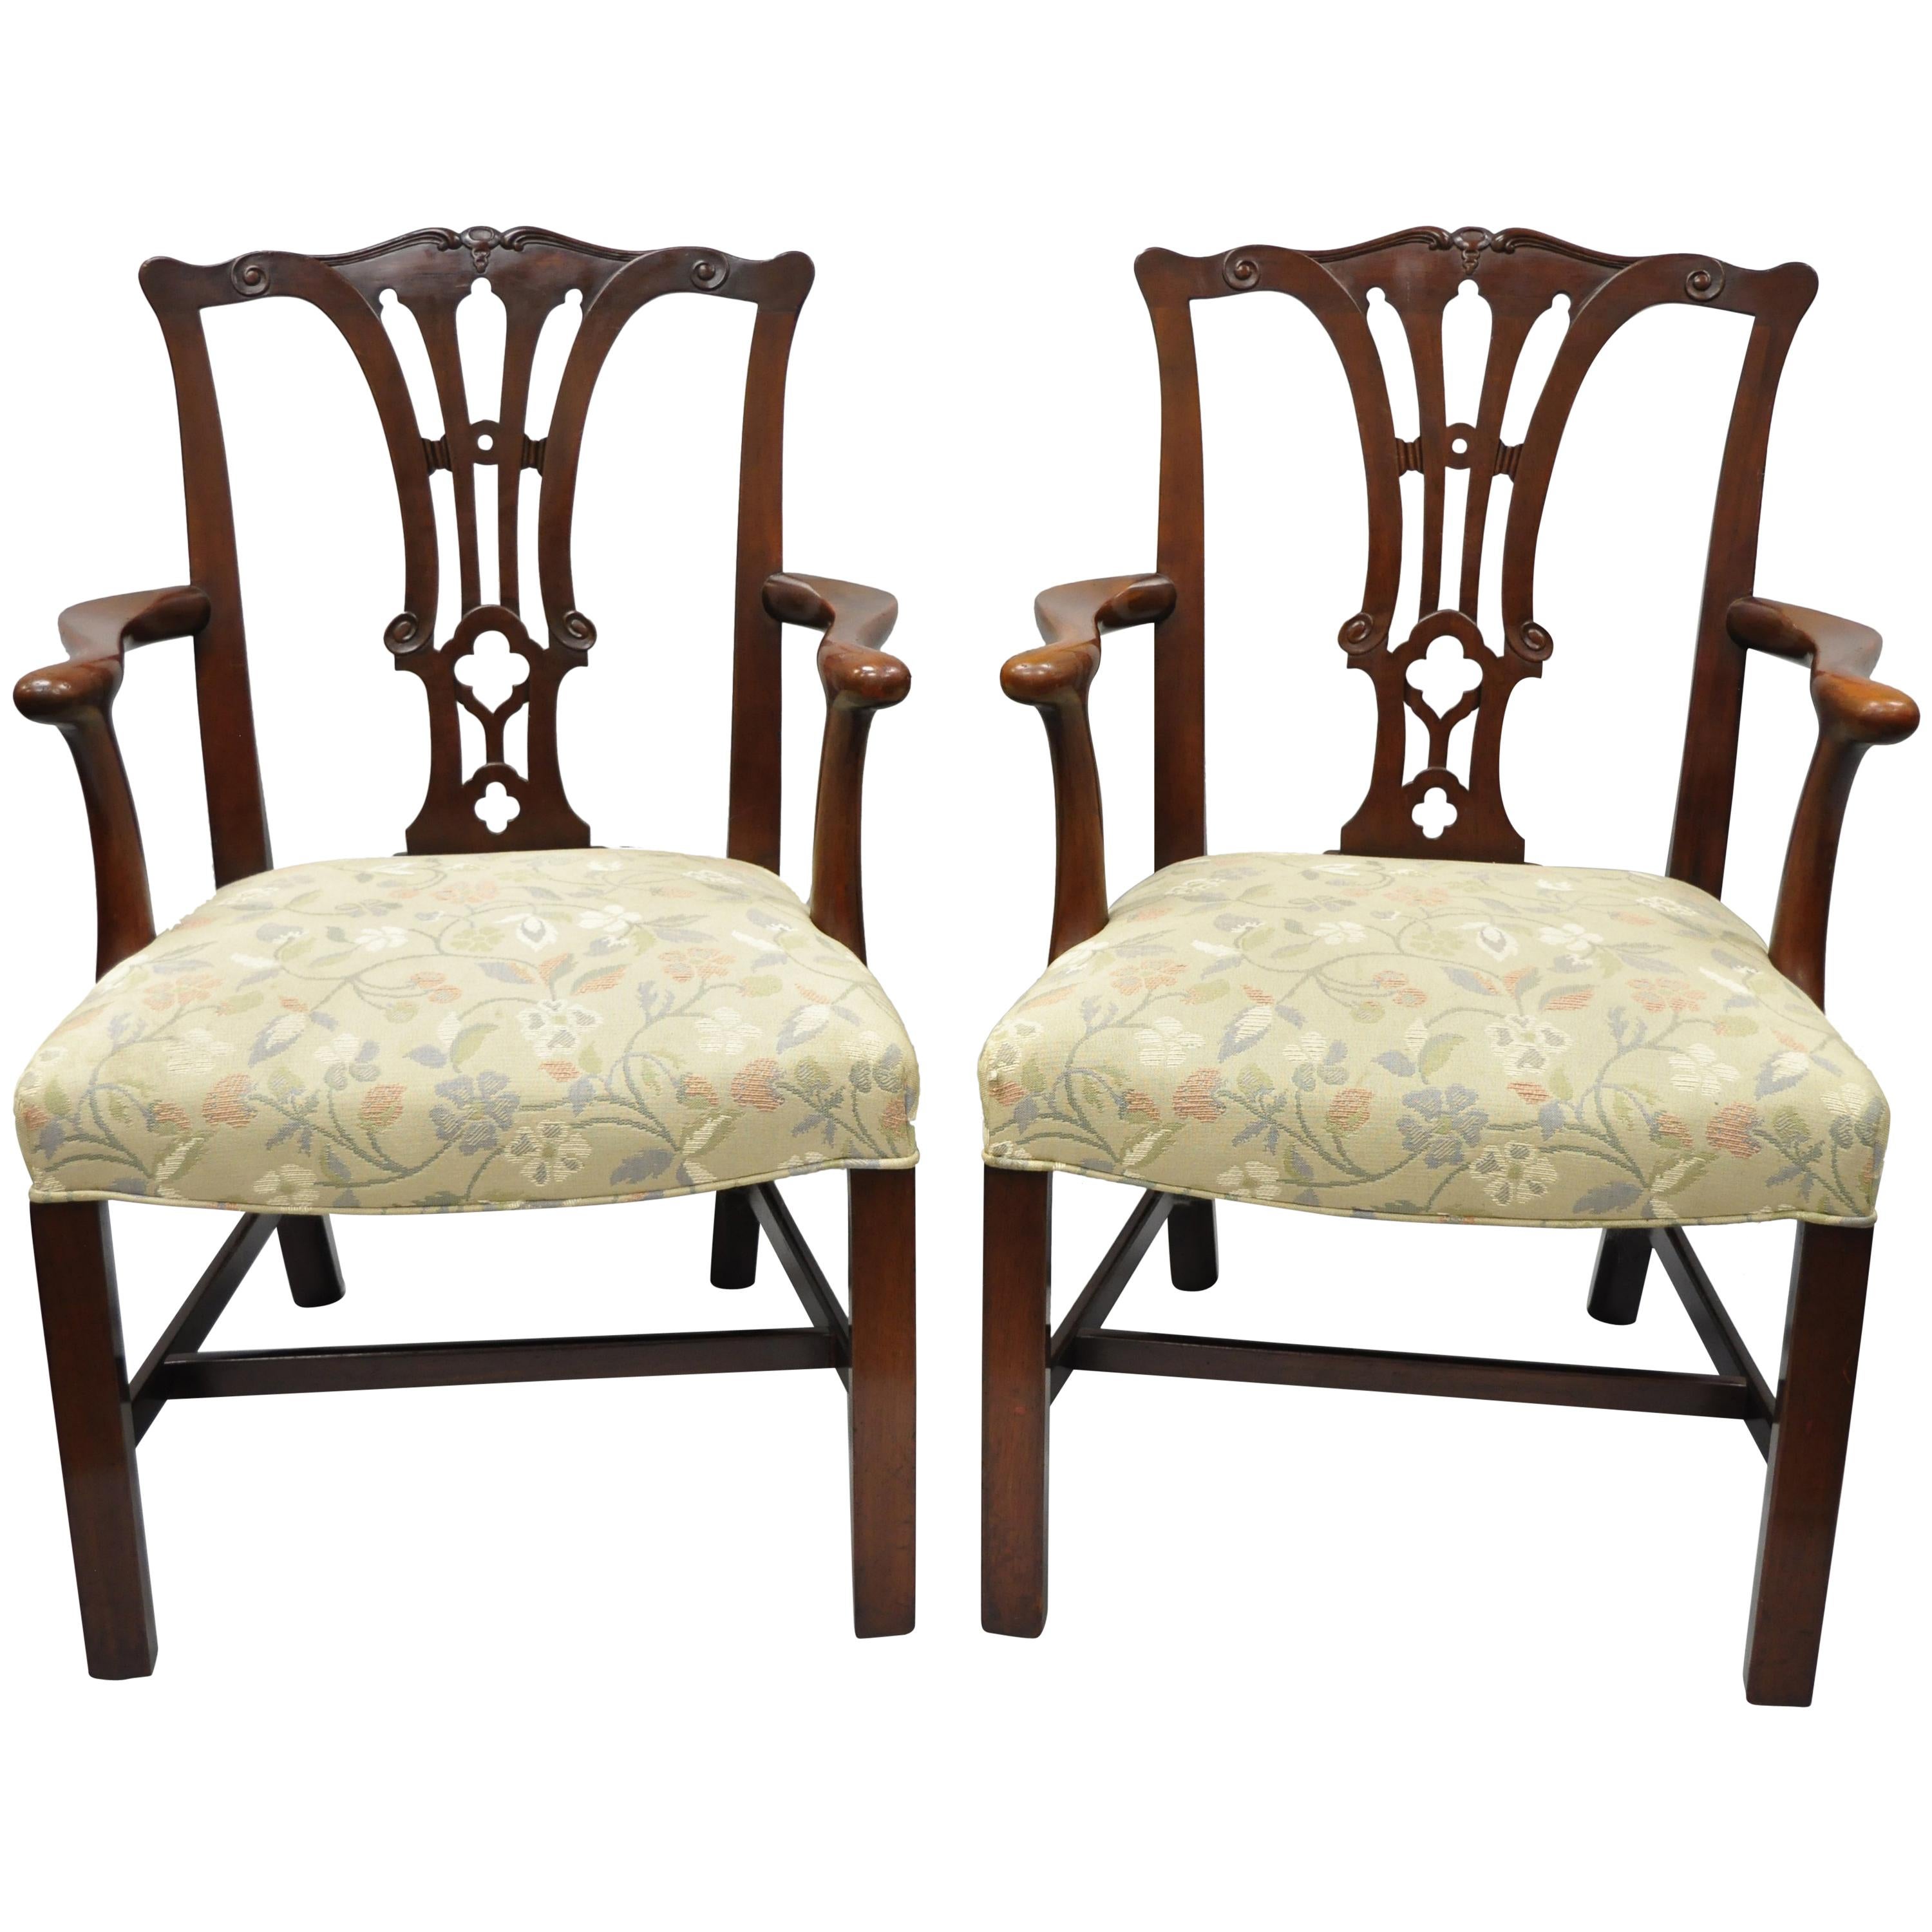 Pair of Schmieg & Kotzian Mahogany Chippendale Style Dining Chairs Armchairs